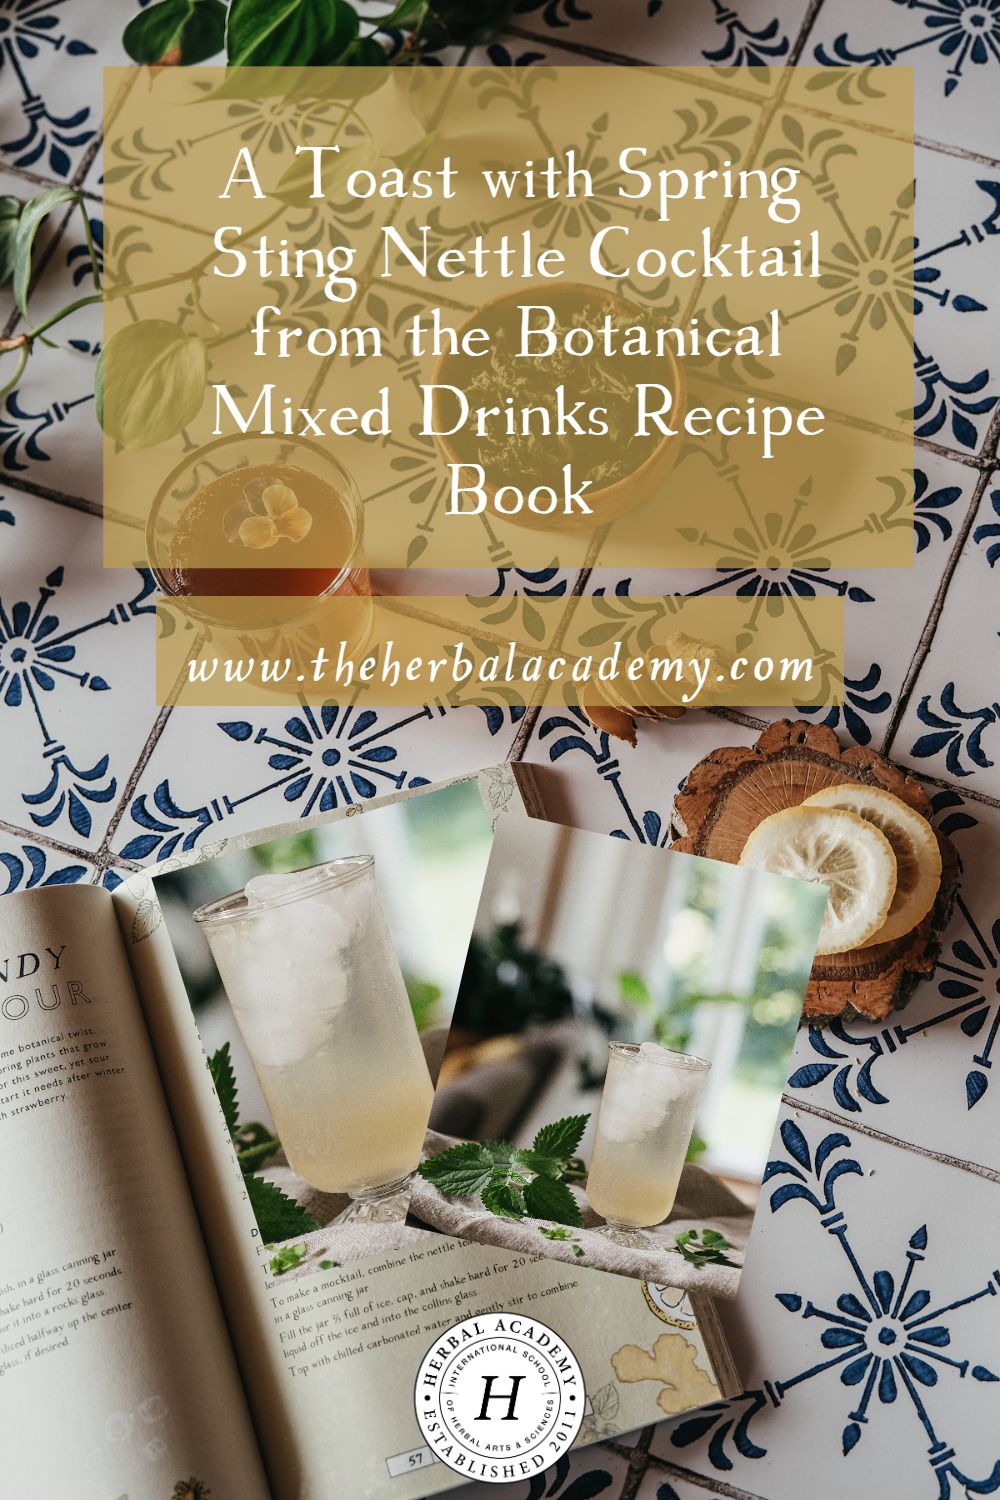 A Toast with Spring Sting Nettle Cocktail from the Botanical Mixed Drinks Recipe Book | Herbal Academy | Herbalists Jane Metzger and Amber Meyers offer up a toast in the spirit of Herbalist Day with a celebratory cocktail twist on nettle tea!